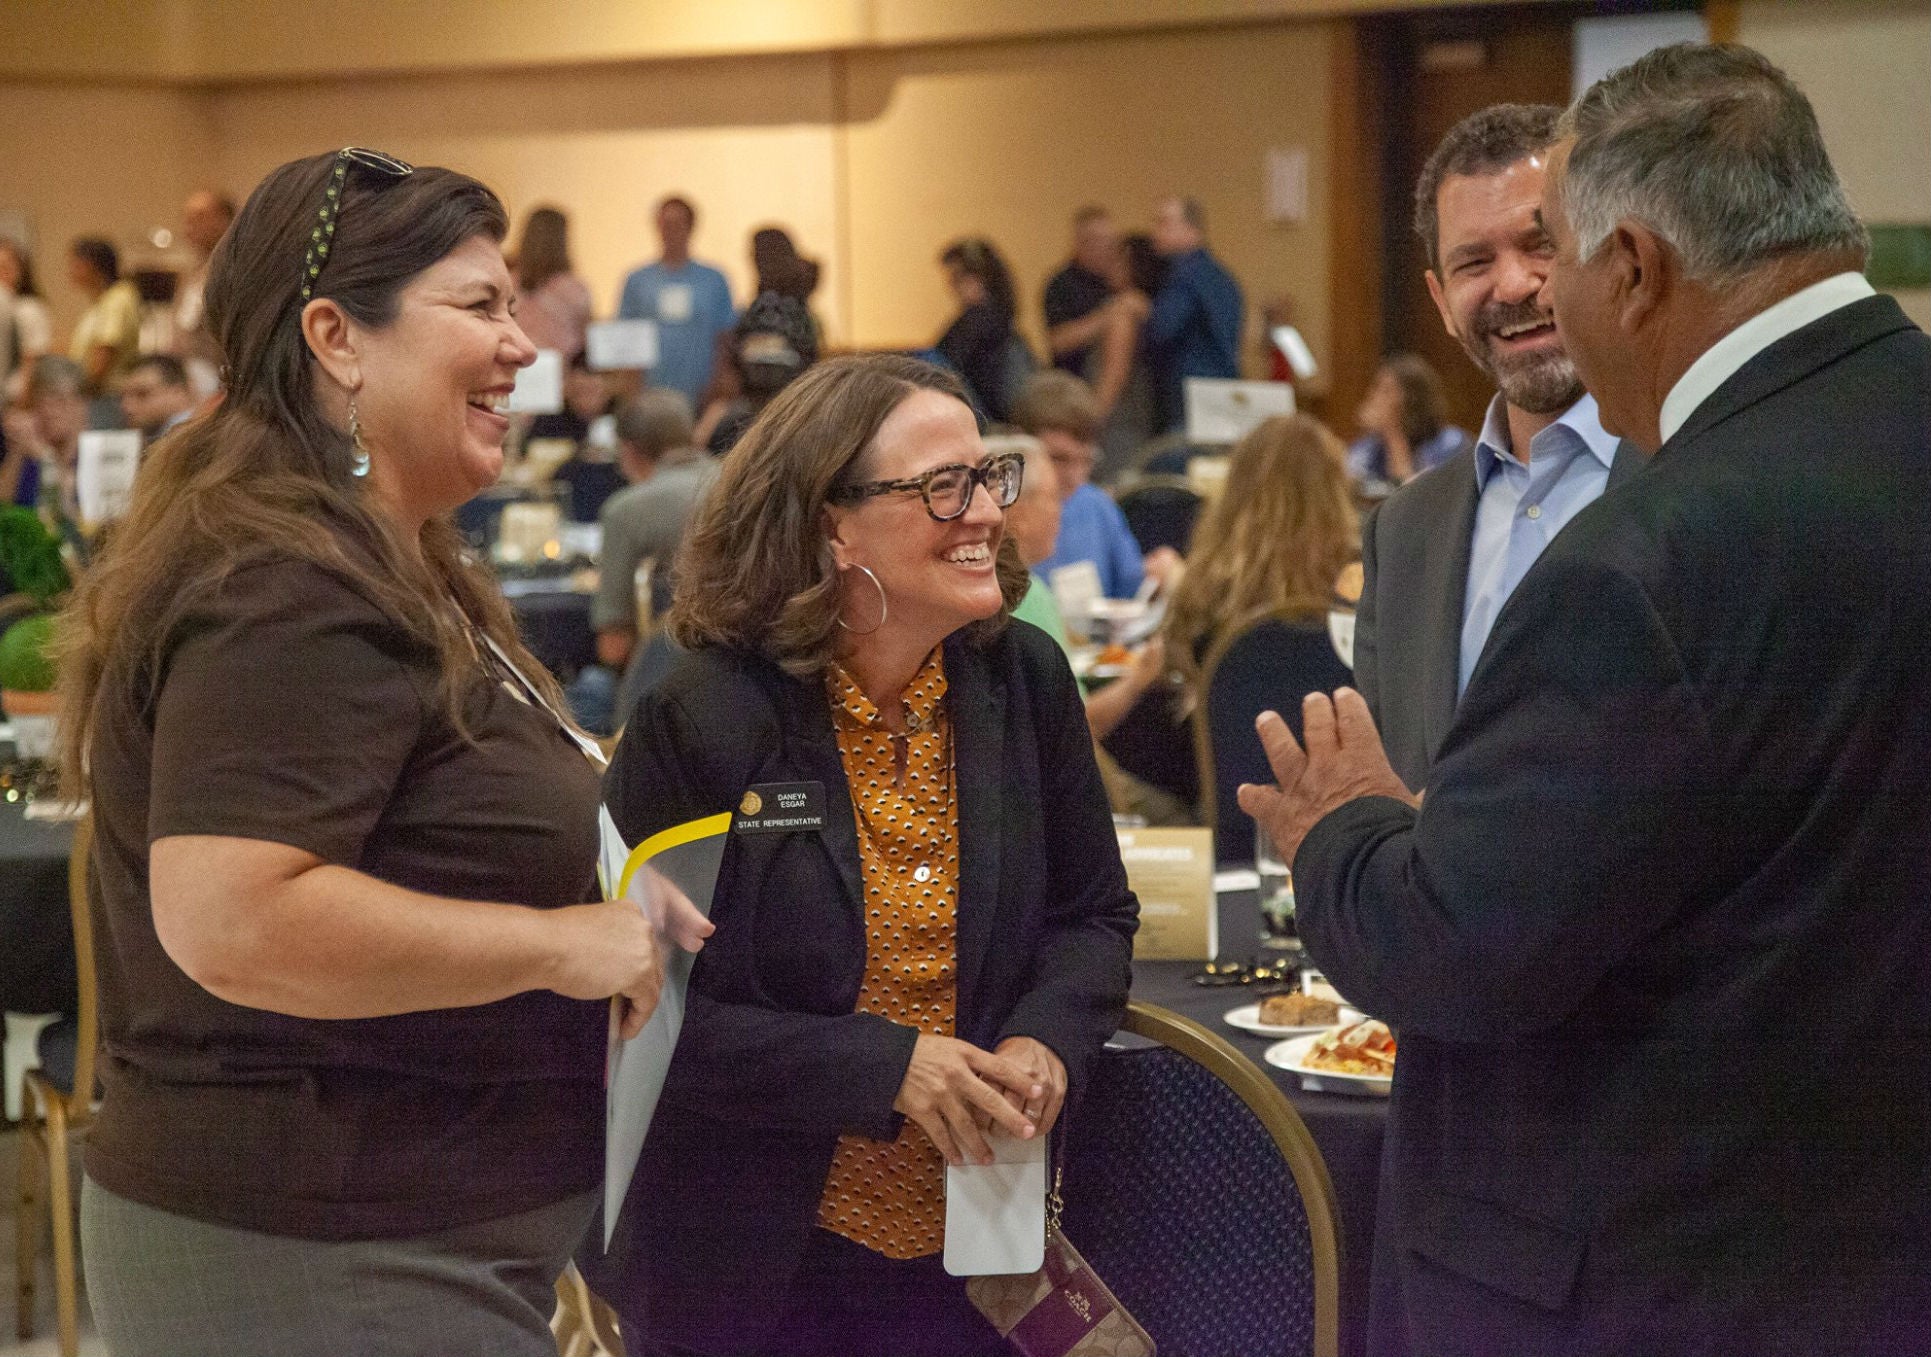 Tanya Kelly-Bowry (Vice President, Office of Government Relations), Representative Daneya Esgar (D-Pueblo) and Todd Saliman (CU Chief Financial Officer) chatting with CU Regent Glen Gallegos